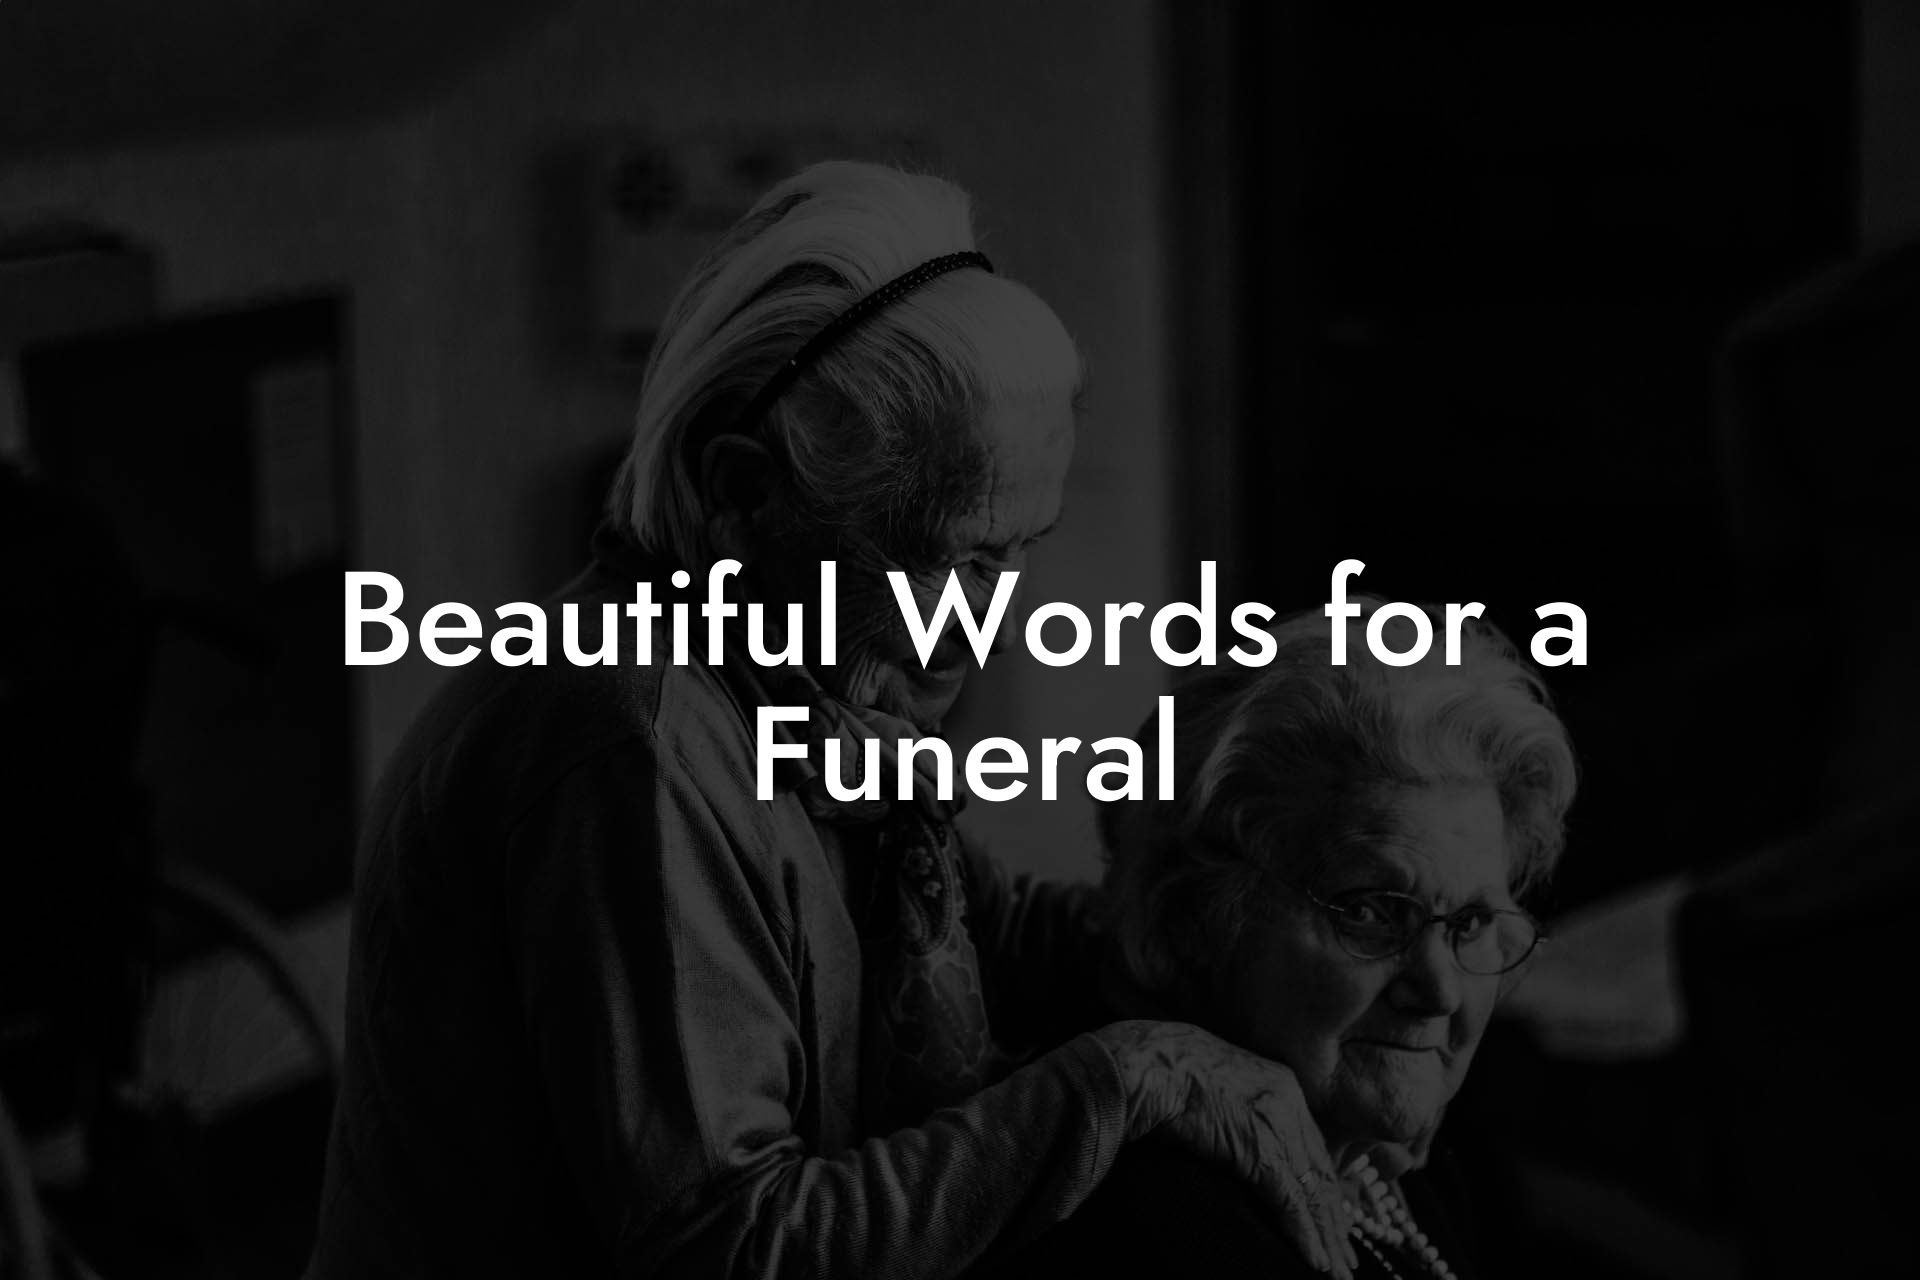 Beautiful Words for a Funeral